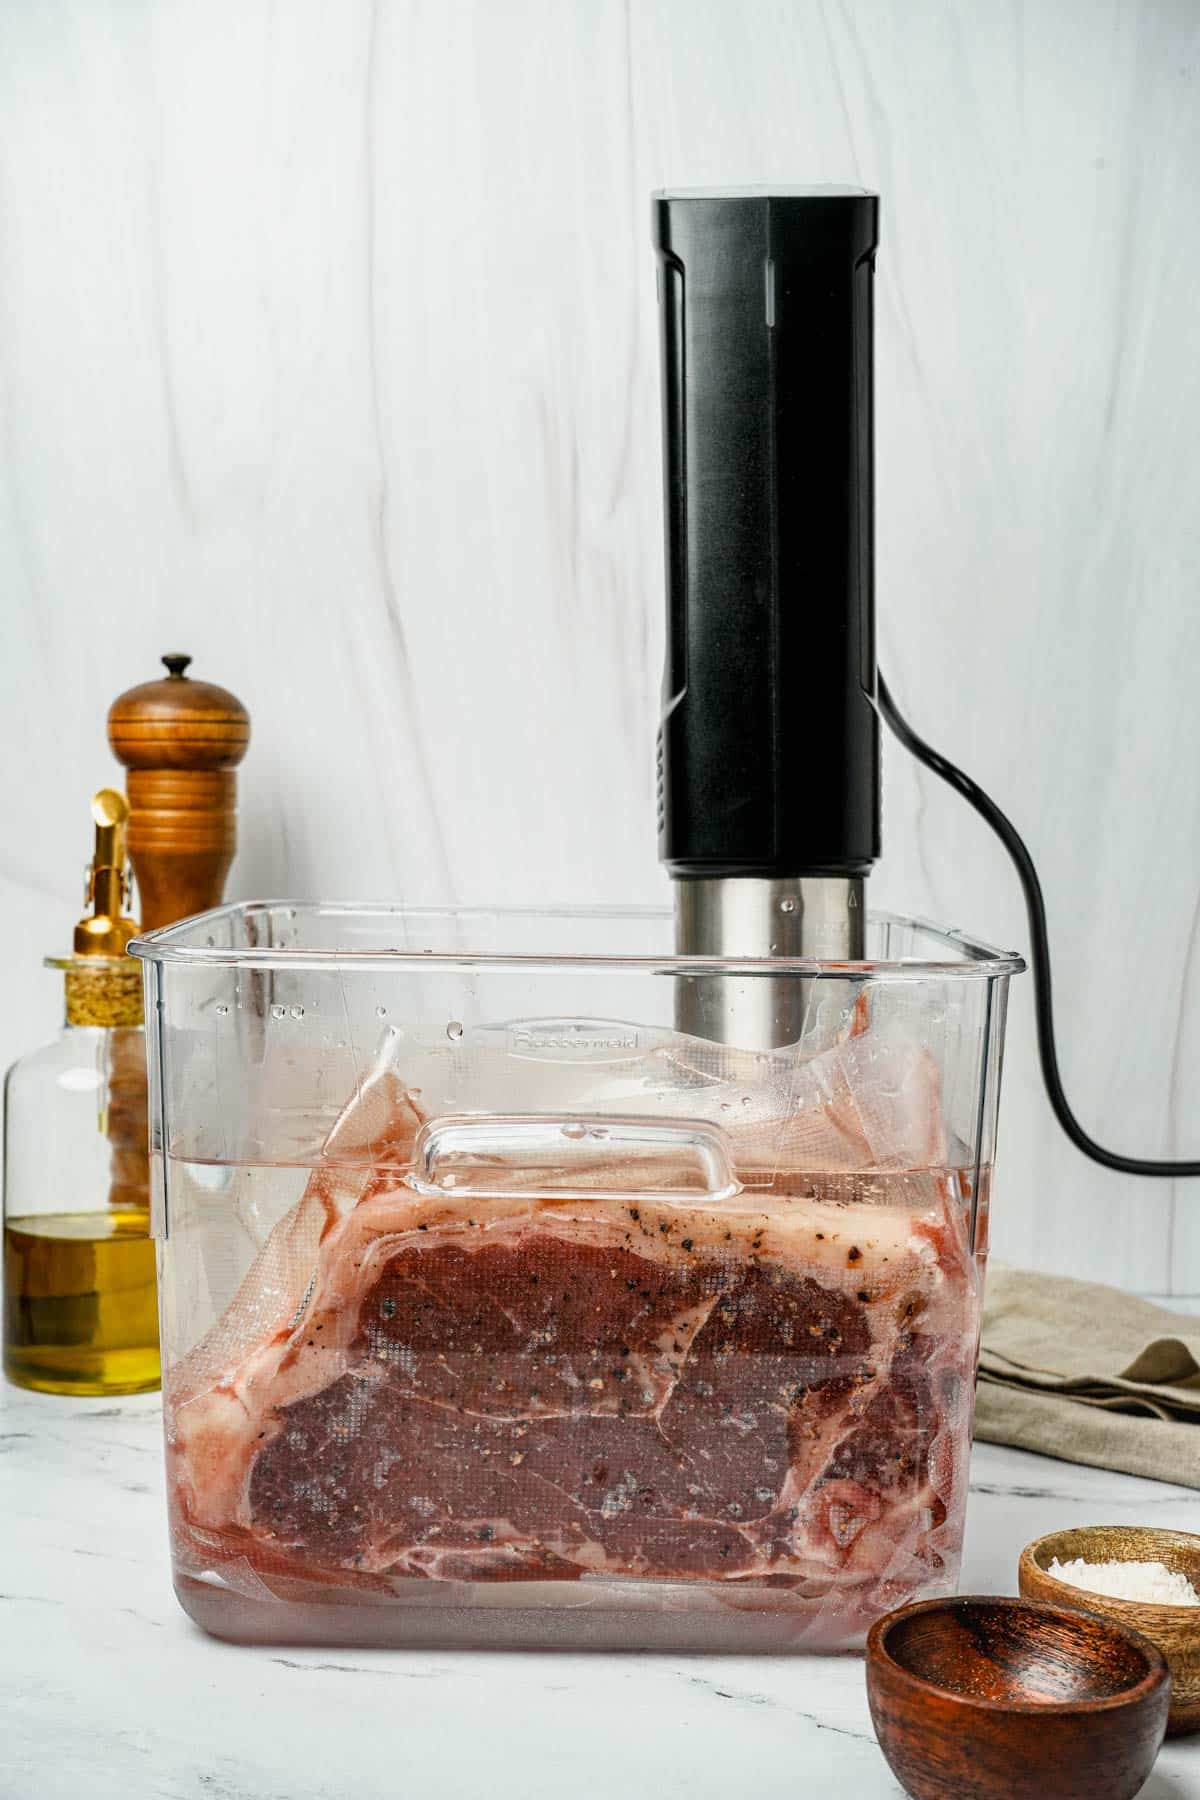 strip steaks in a sous vide container being cooked